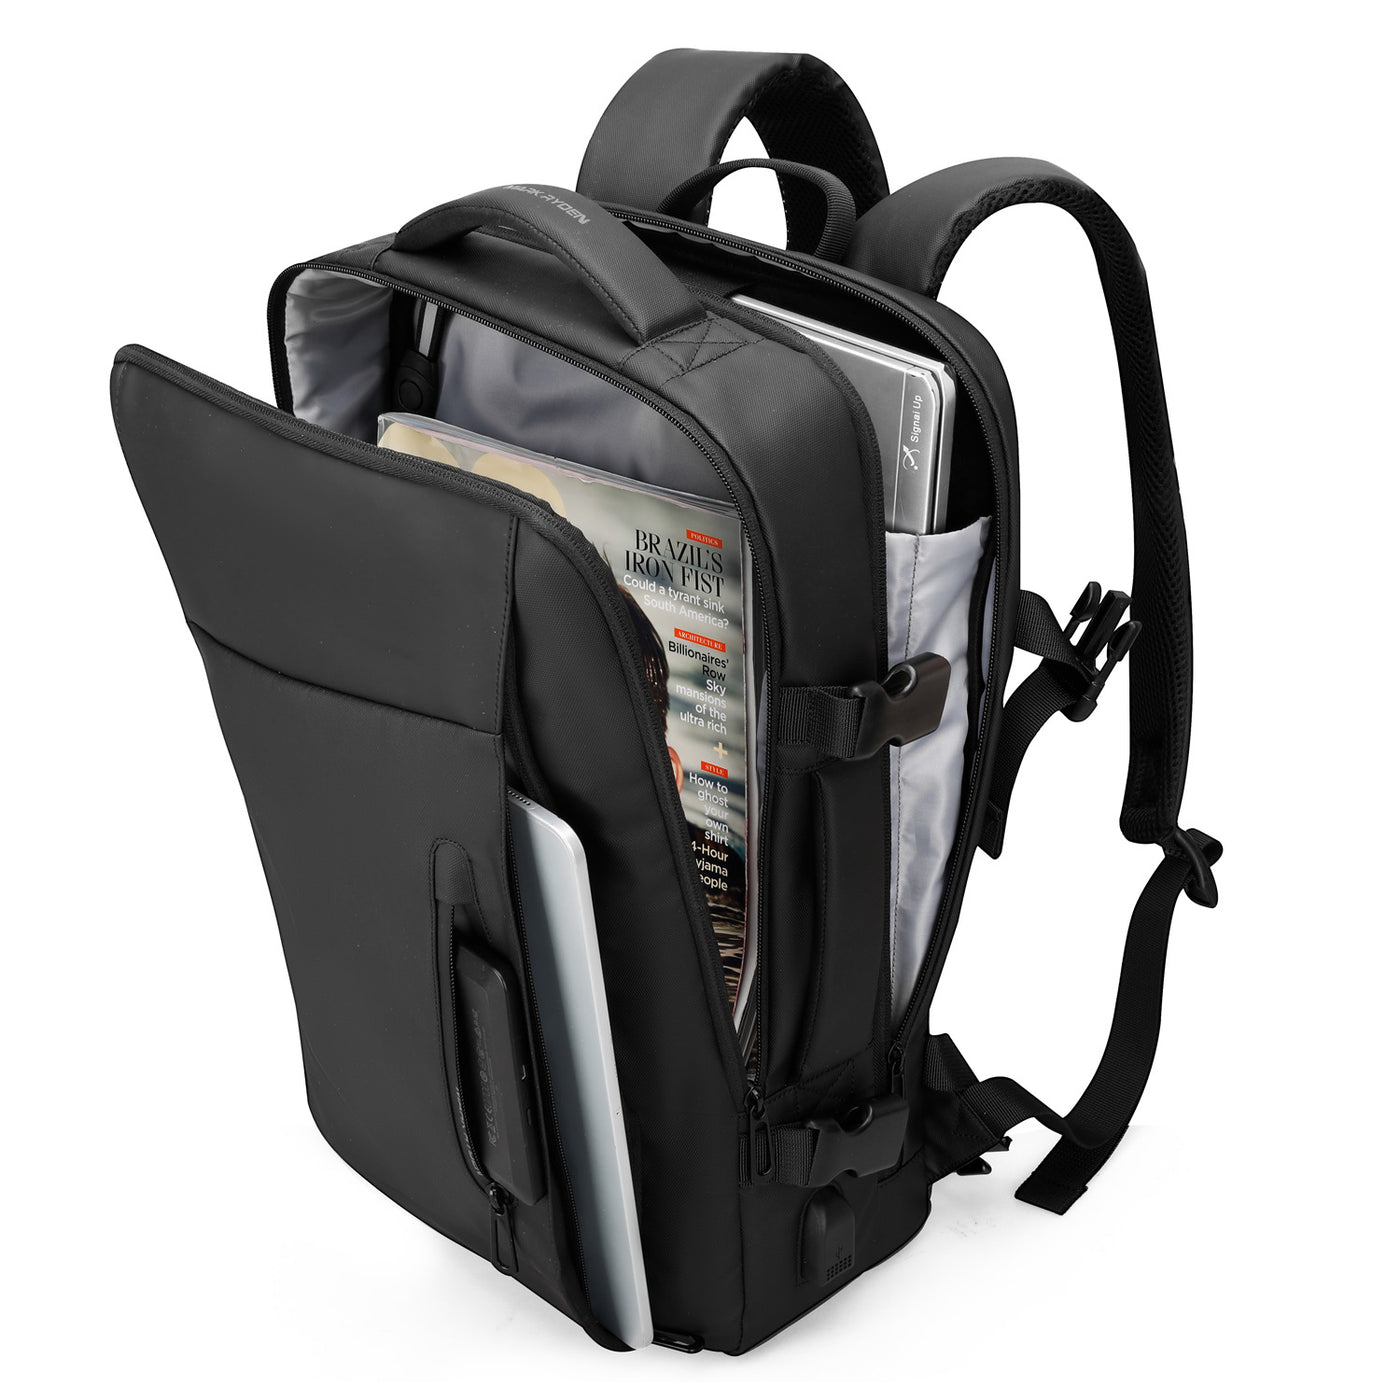 Mark Ryden minimal black USB Charging backpack with zippers open showing two compartments